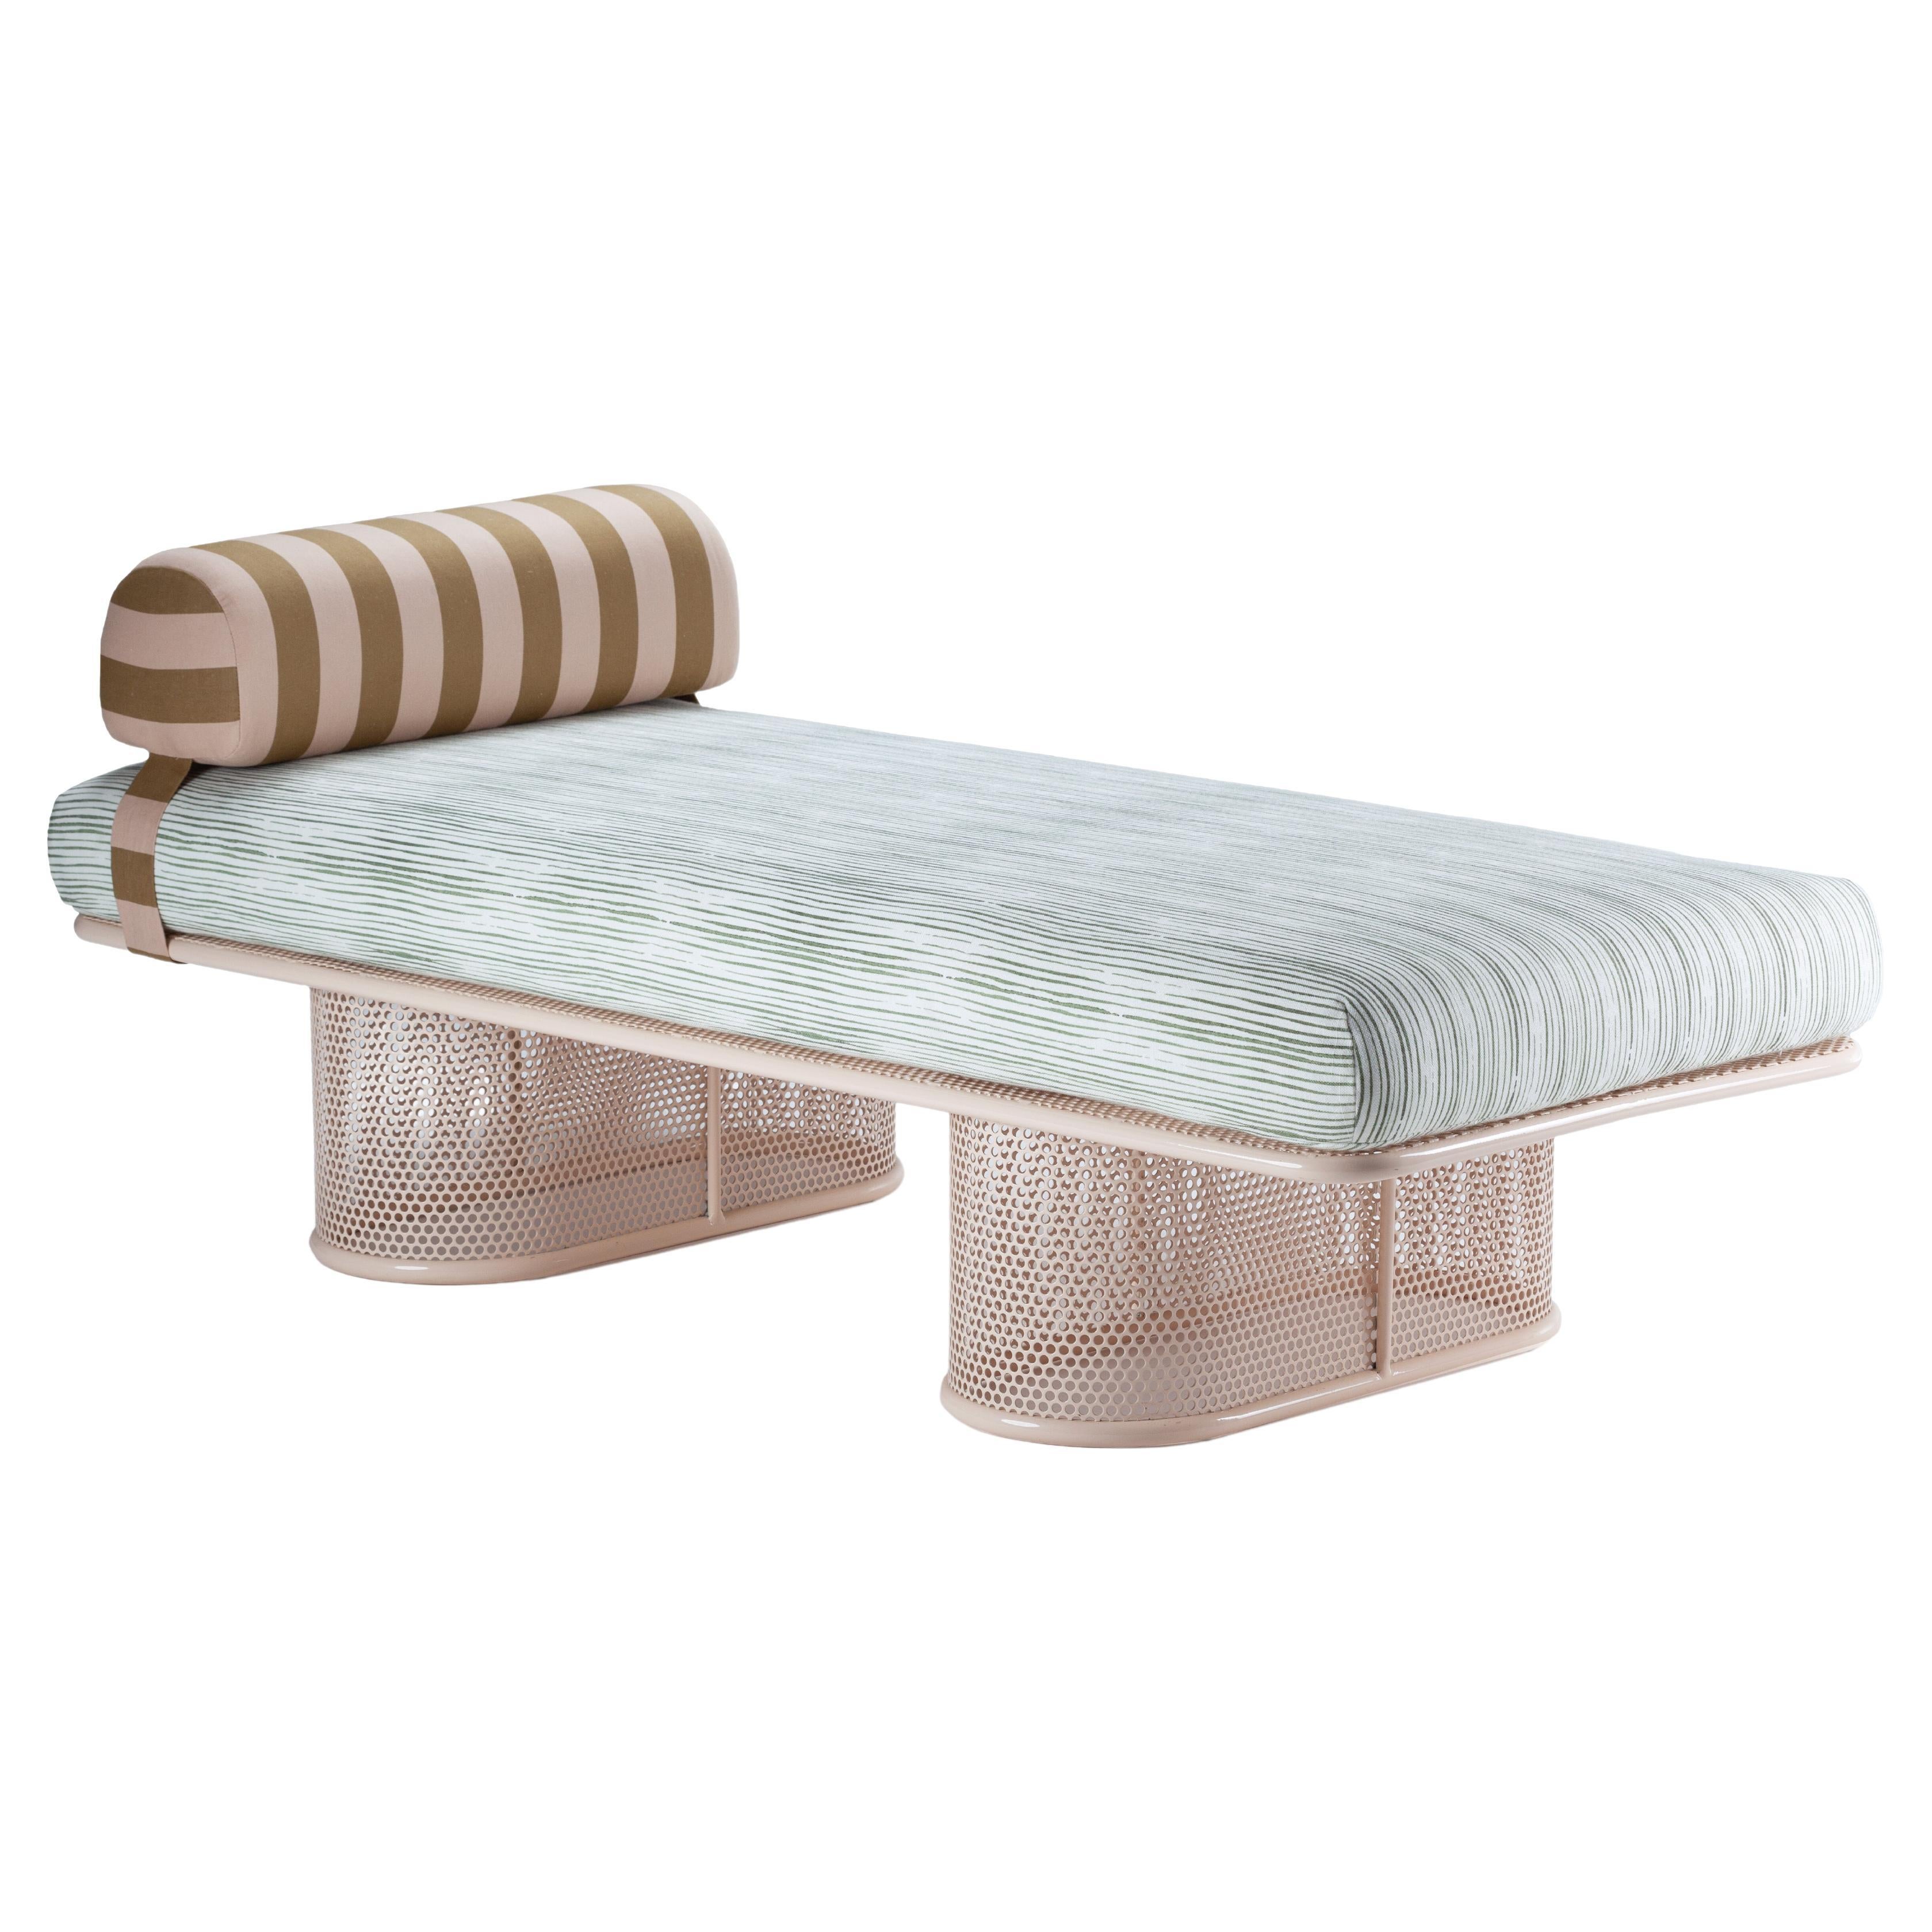 Contemporary Riviera Bench in Lacquered Nude metal & Stripes fabric for Outdoors For Sale